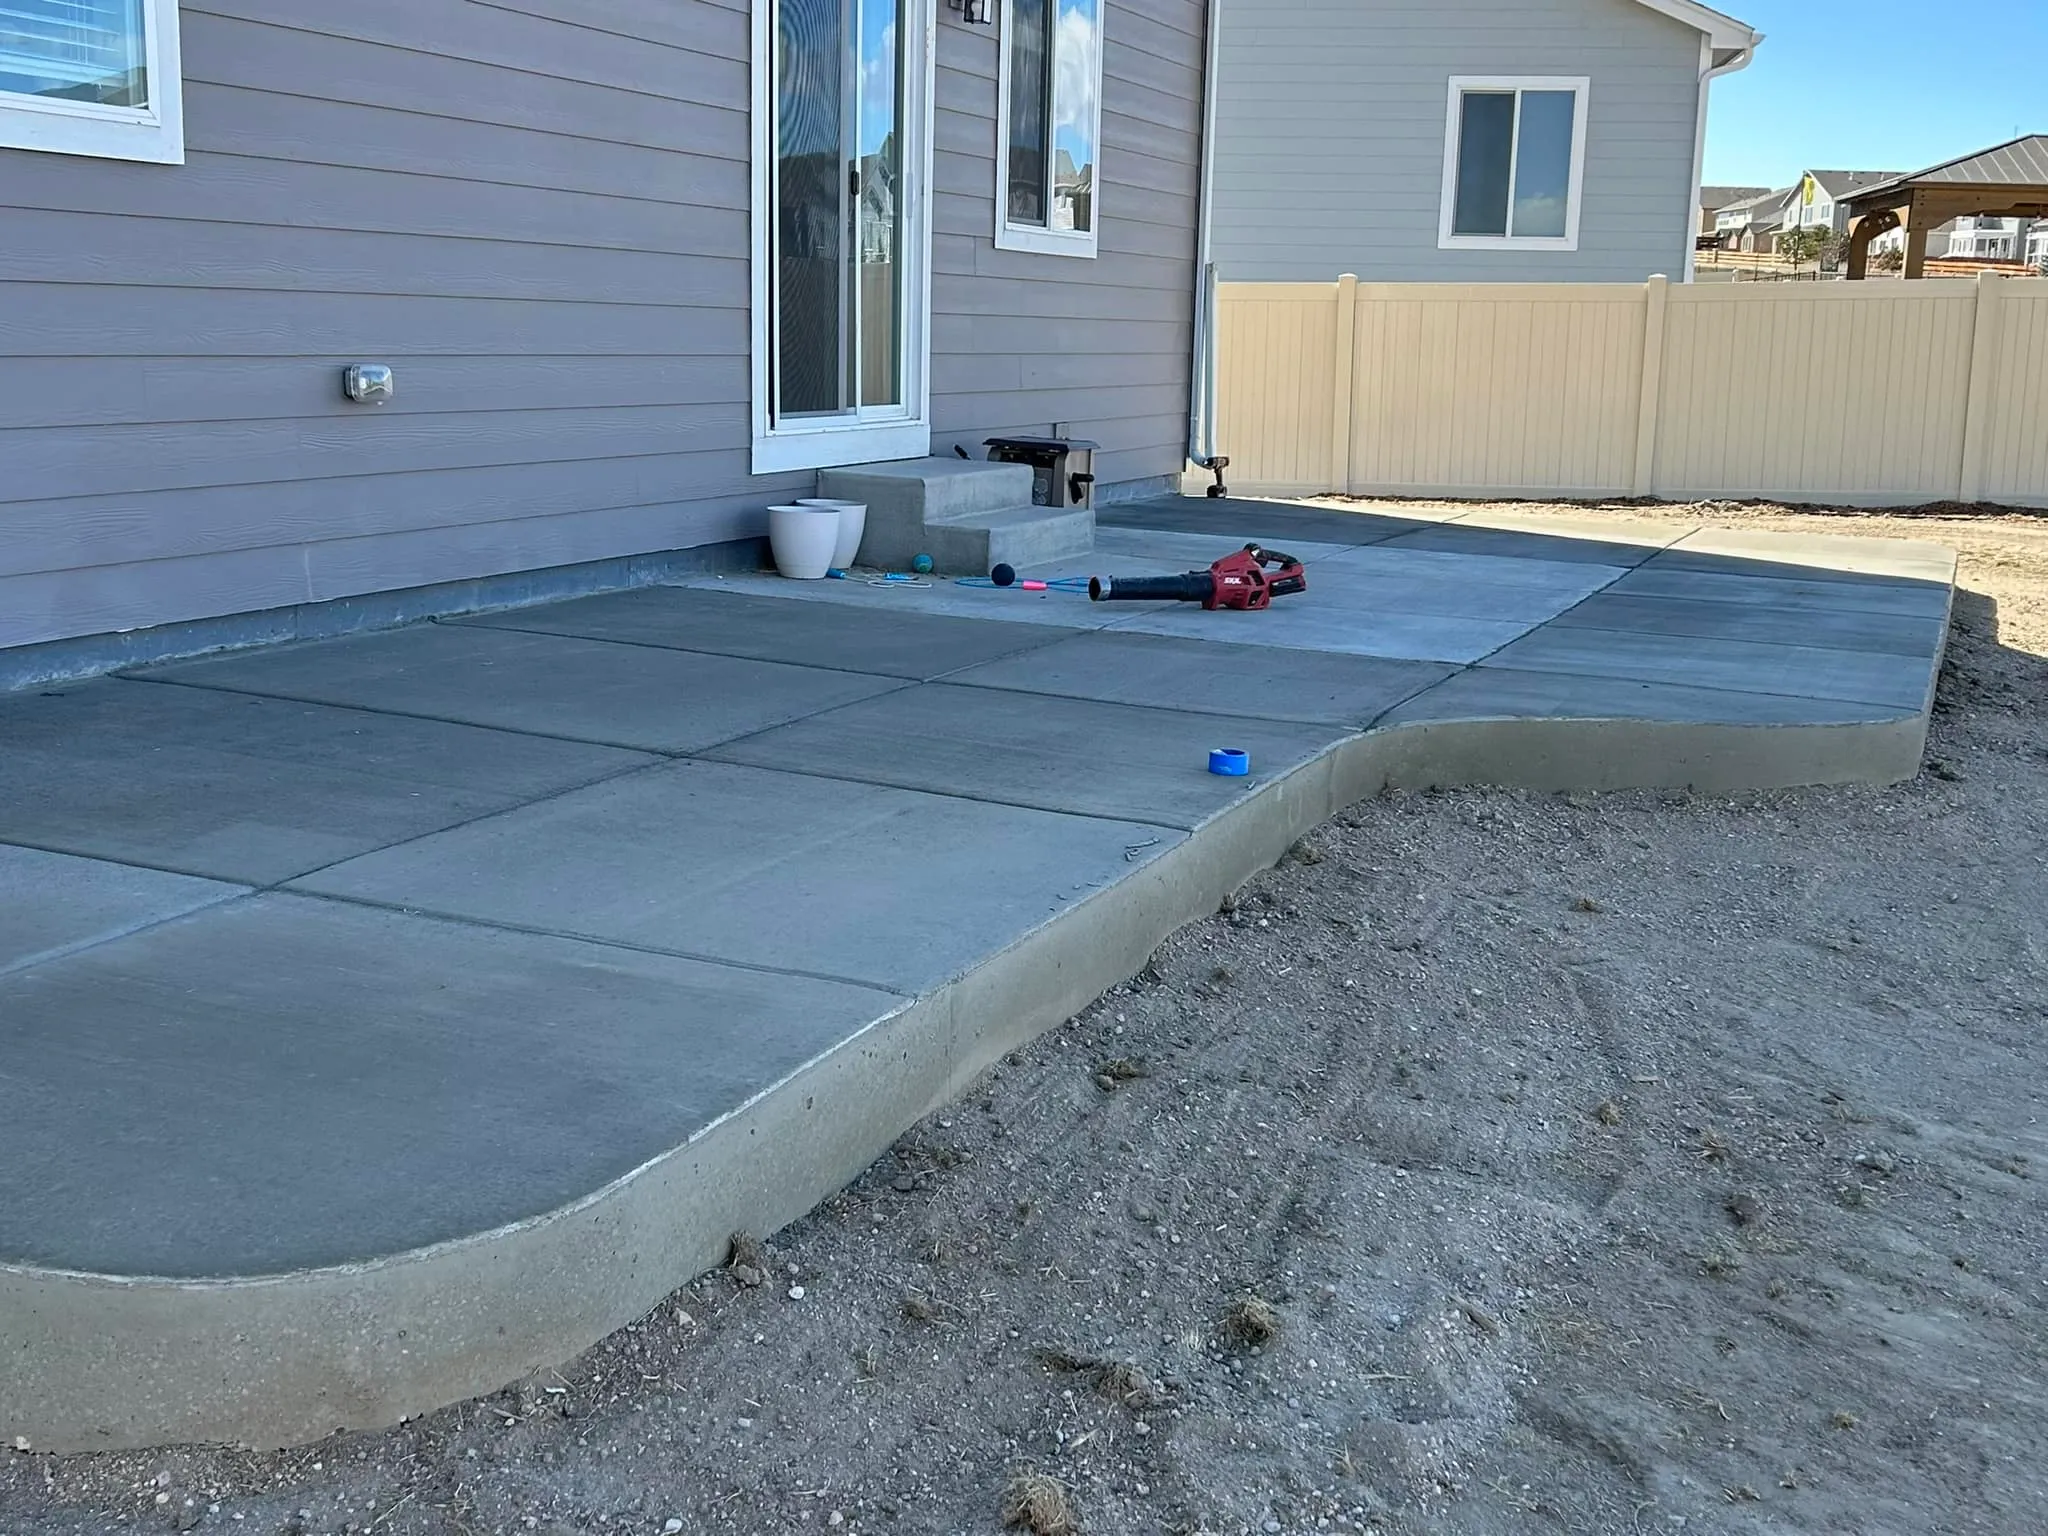 Residential and Commercial Concrete for Imperial C and C in Colorado Springs, Colorado